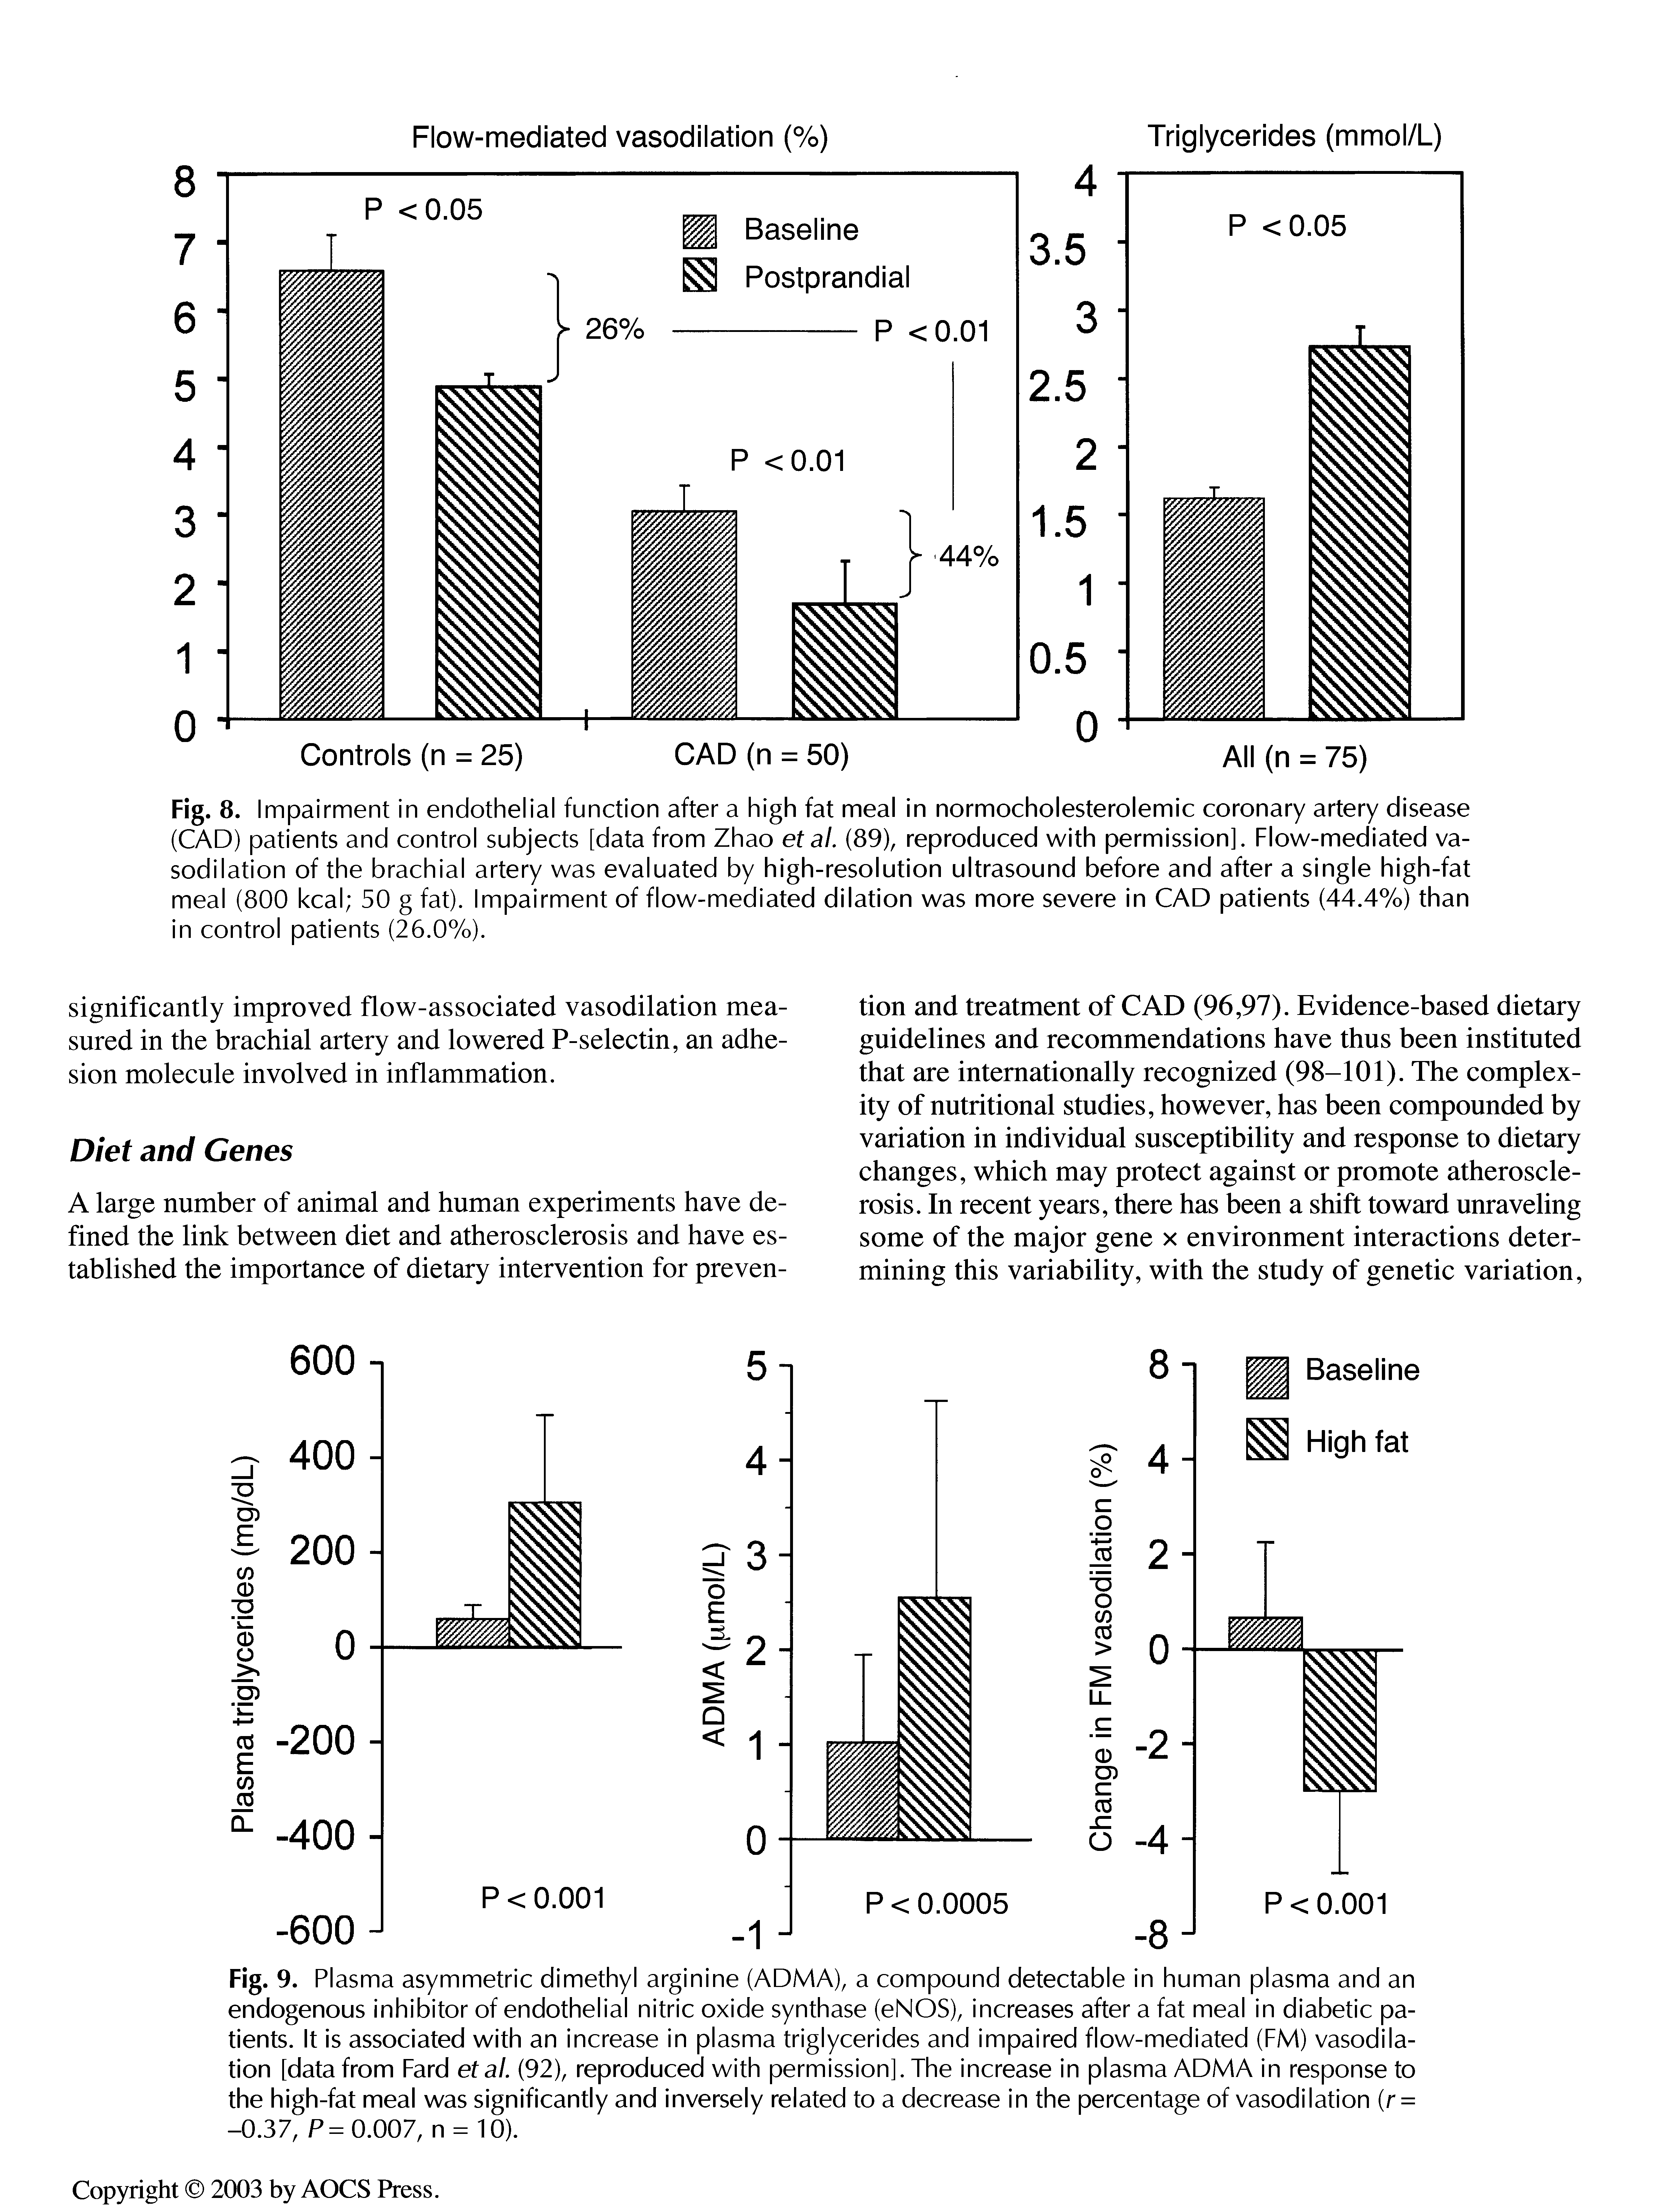 Fig. 9. Plasma asymmetric dimethyl arginine (ADMA), a compound detectable in human plasma and an endogenous inhibitor of endothelial nitric oxide synthase (eNOS), increases after a fat meal in diabetic patients. It is associated with an increase in plasma triglycerides and impaired flow-mediated (FM) vasodilation [data from Fard etal. (92), reproduced with permission]. The increase in plasma ADMA in response to the high-fat meal was significantly and inversely related to a decrease in the percentage of vasodilation (r = -0.37, P= 0.007, n = 10).